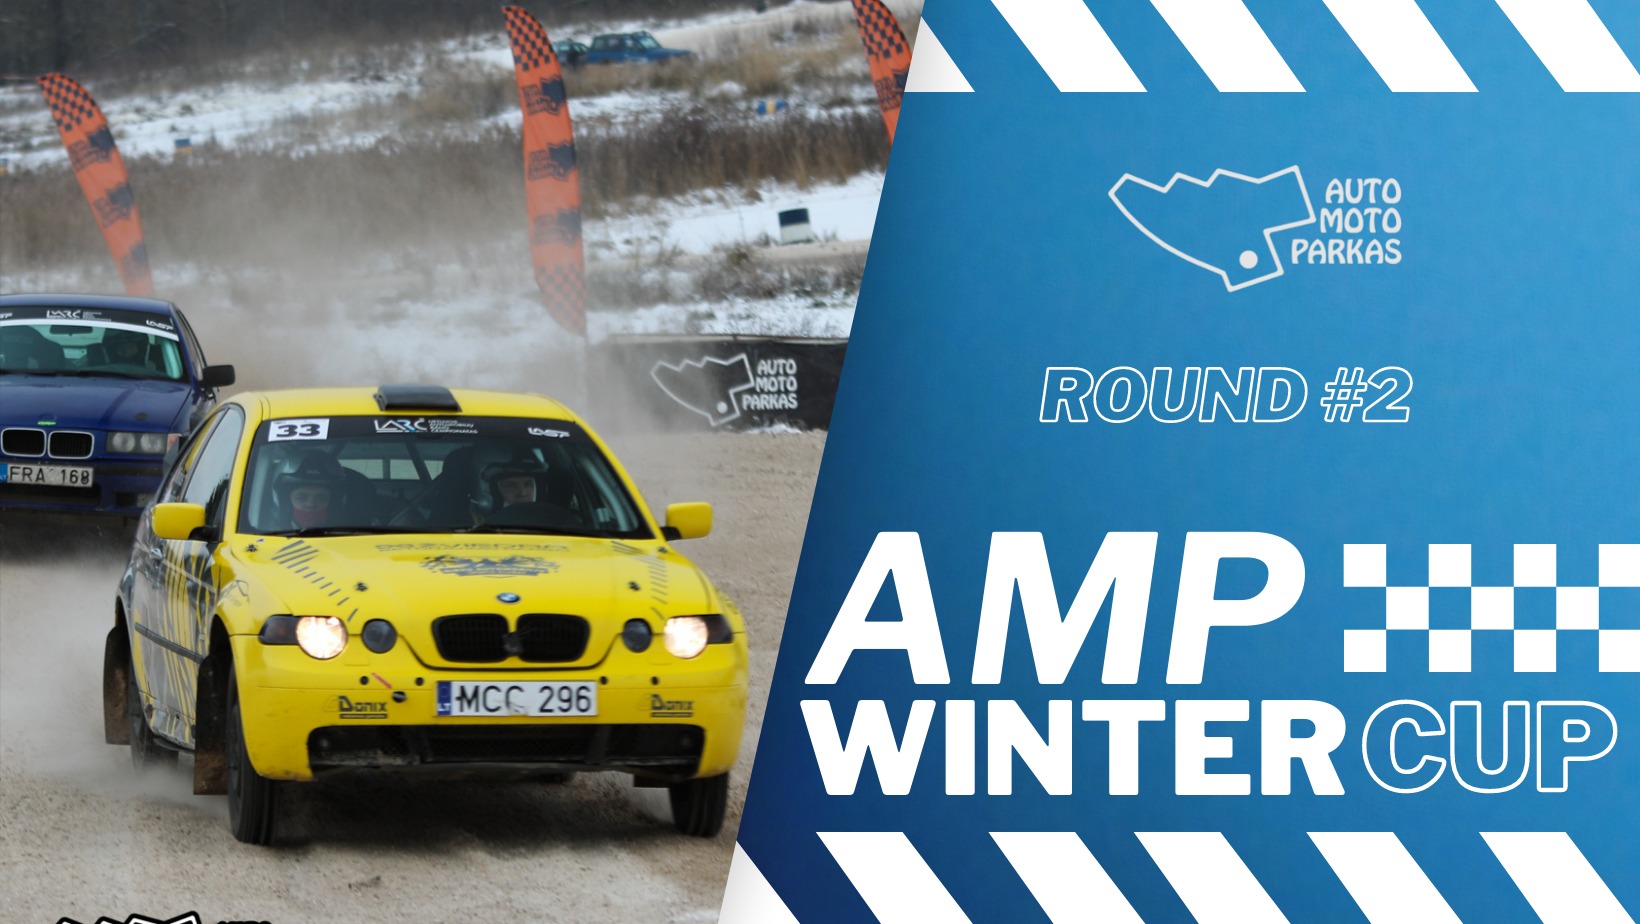 "AMP Winter Cup" - round #2